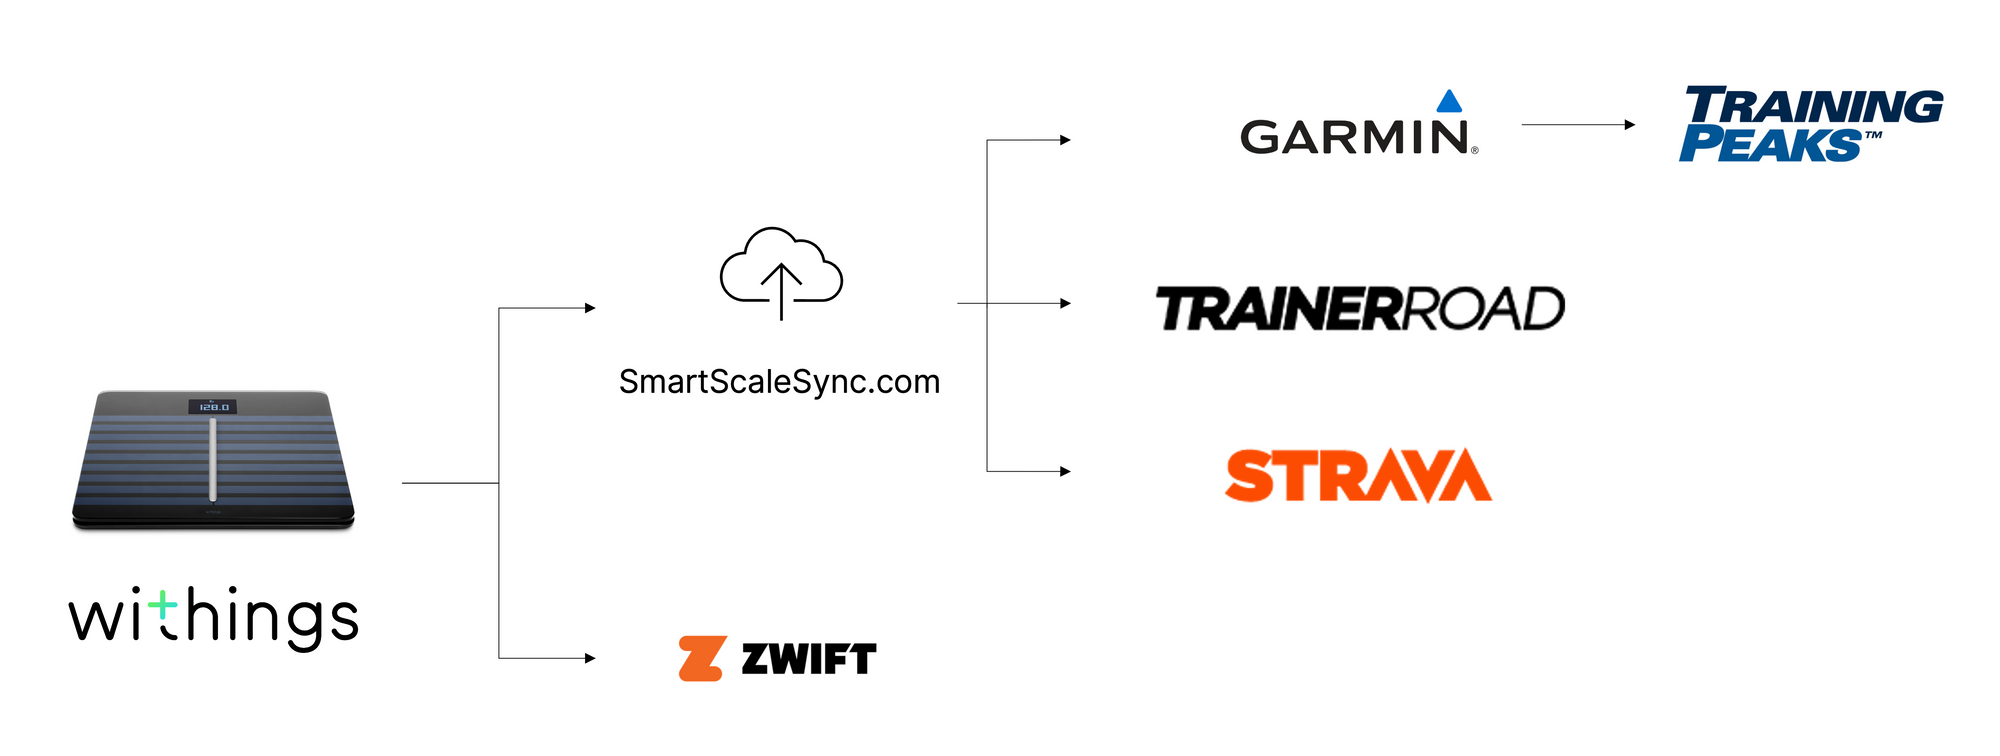 How to sync weight data to Garmin Connect, Zwift, Training and Trainer Road